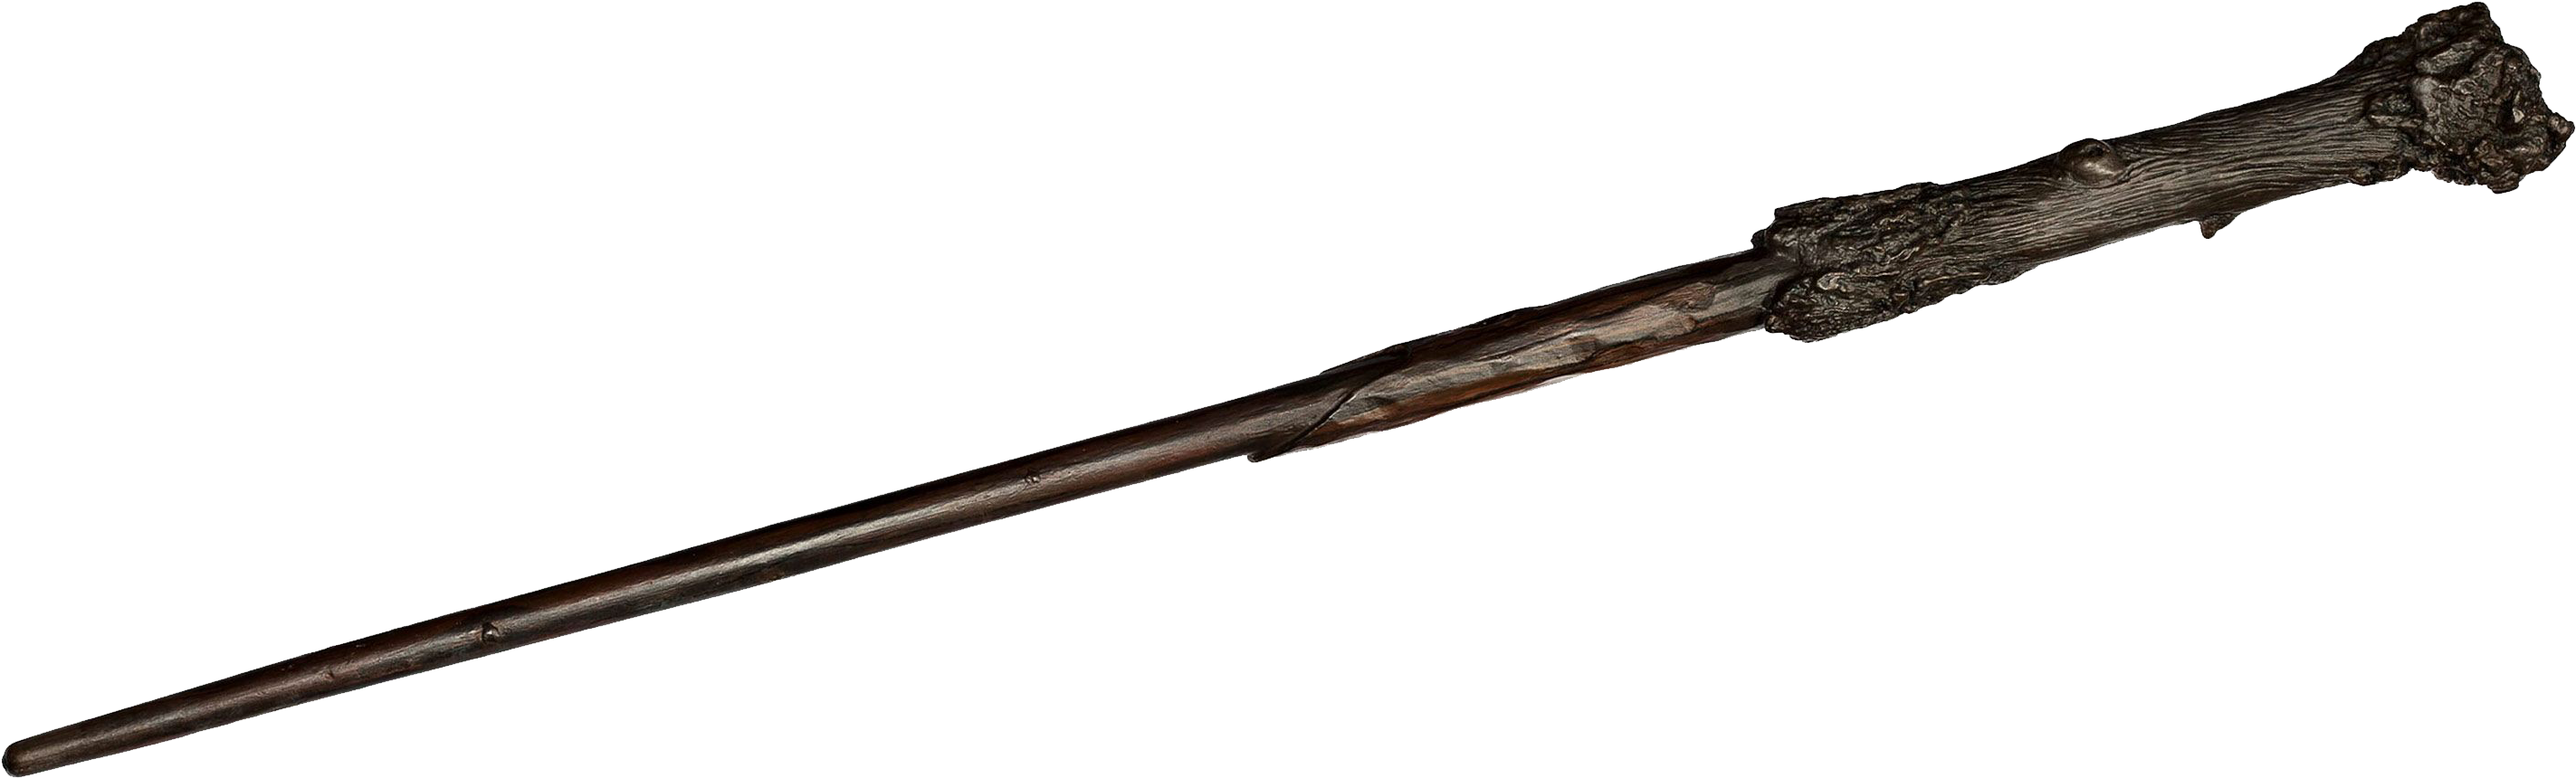 Wand Png 2846 X 860